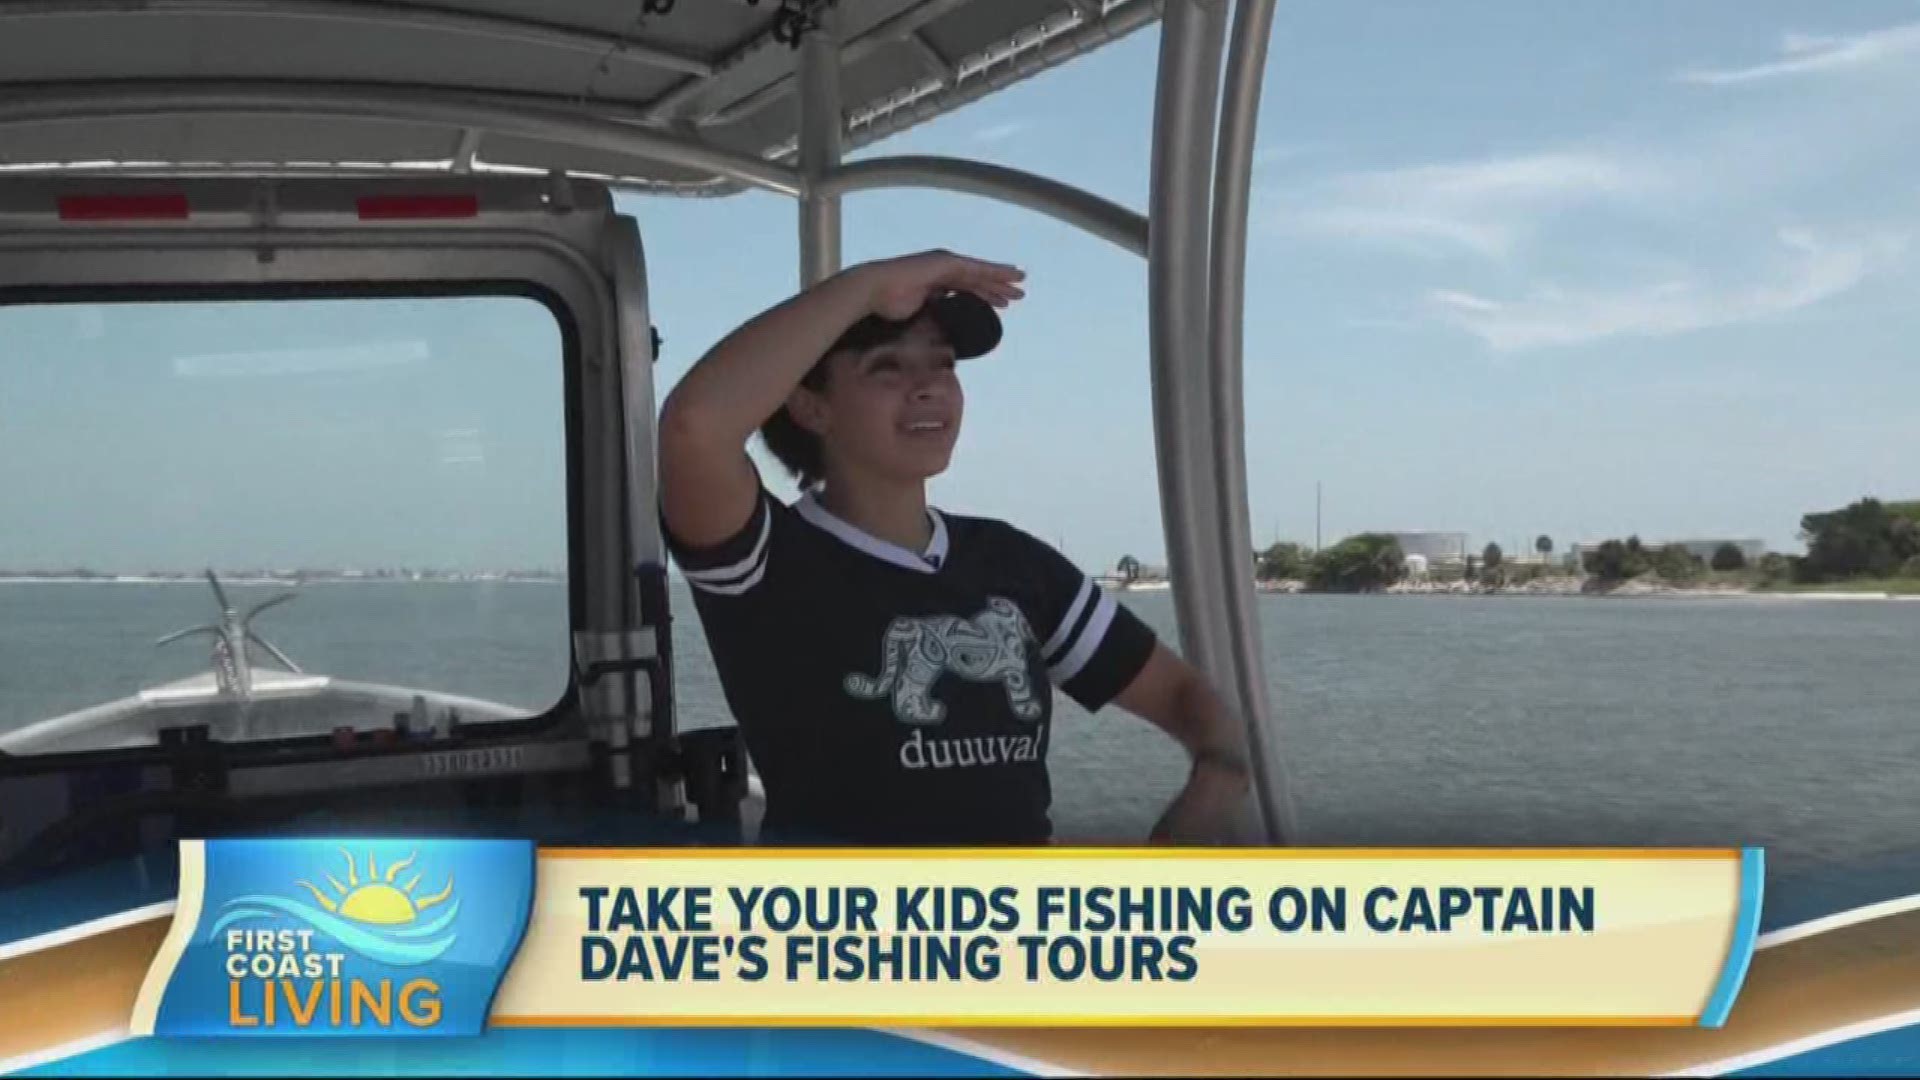 A fun activity for the kids to do this summer! Captain Dave is hosting private fishing tours.